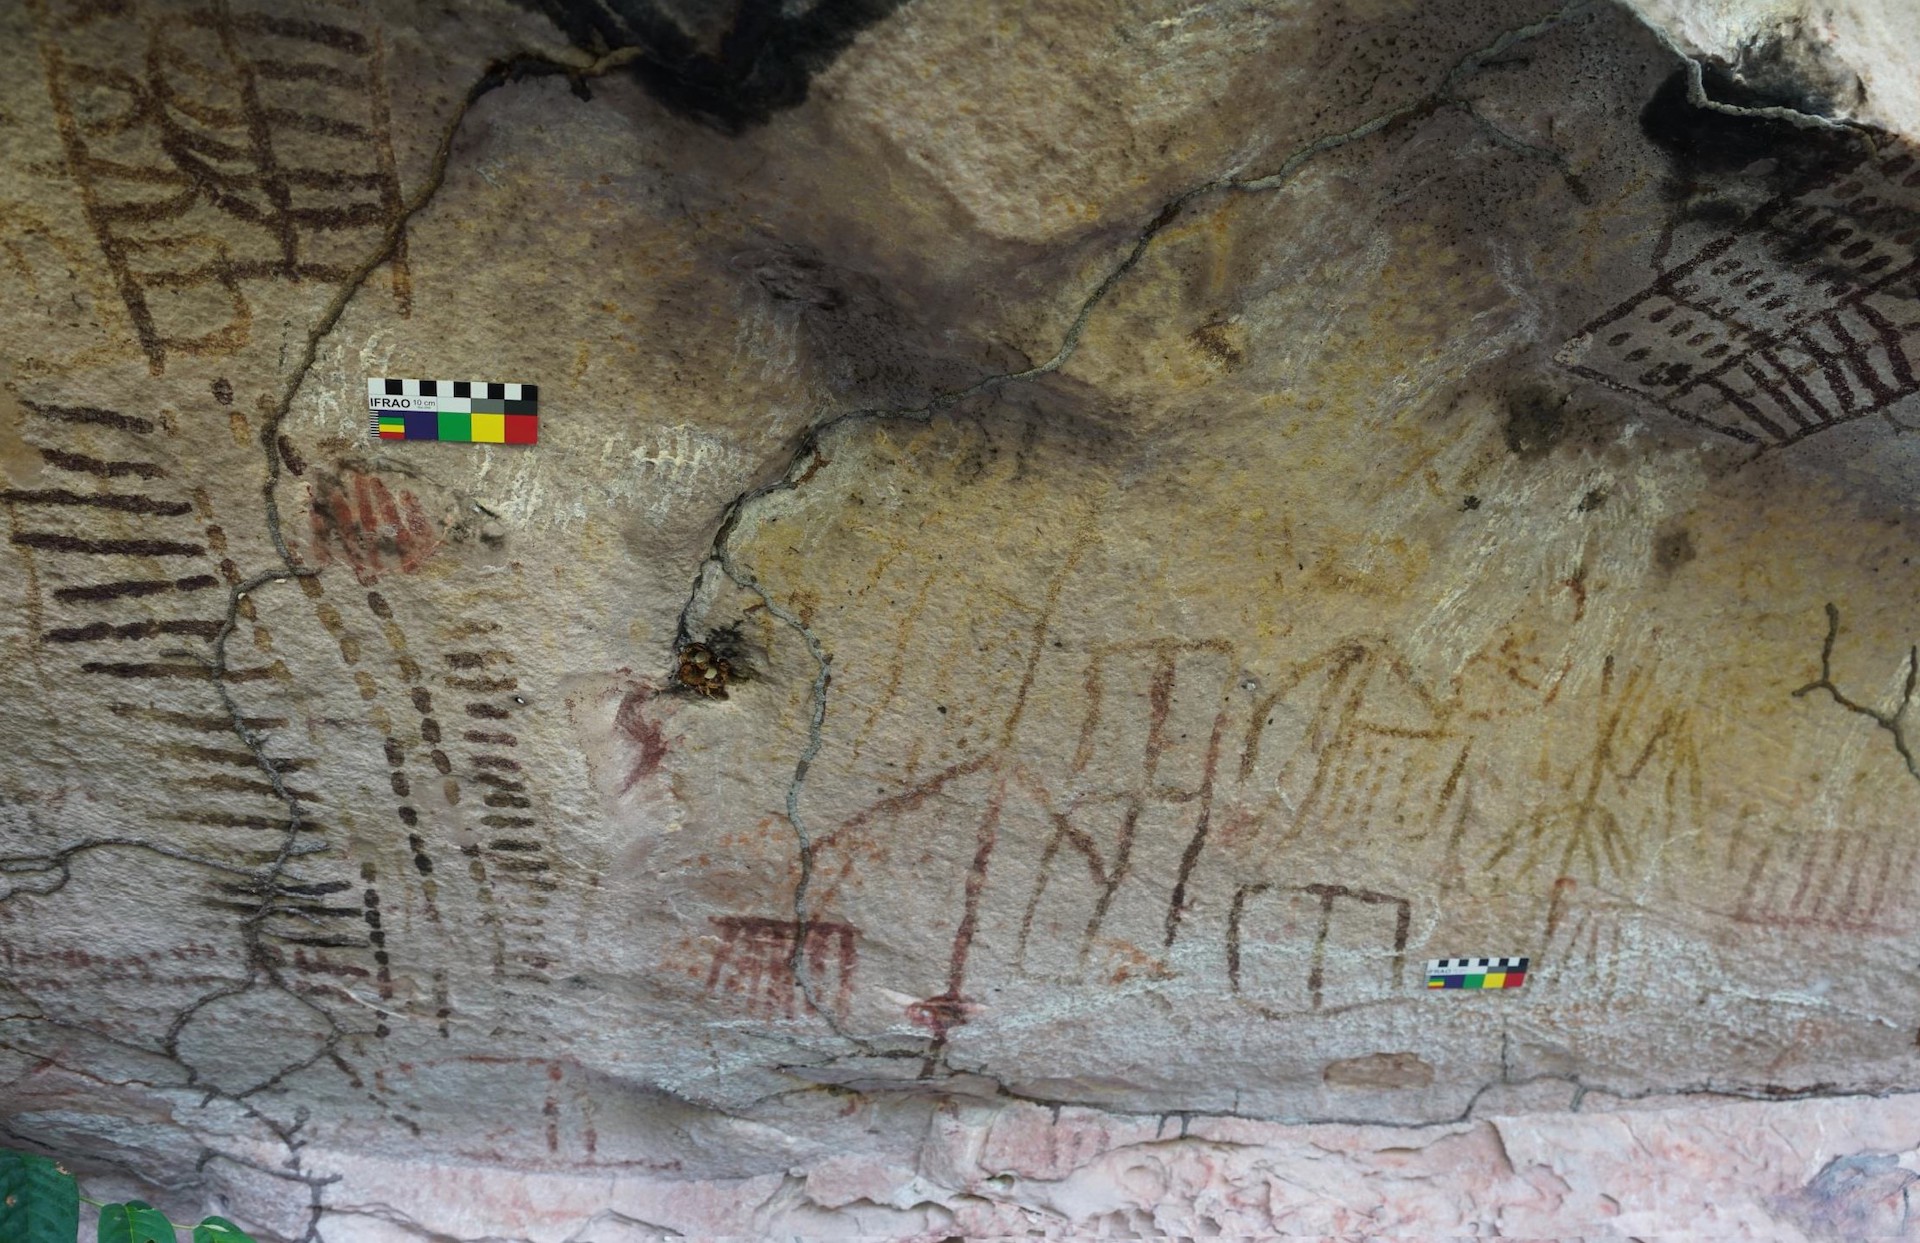 A view of the rock art showing parallel lines and squares with dots inside